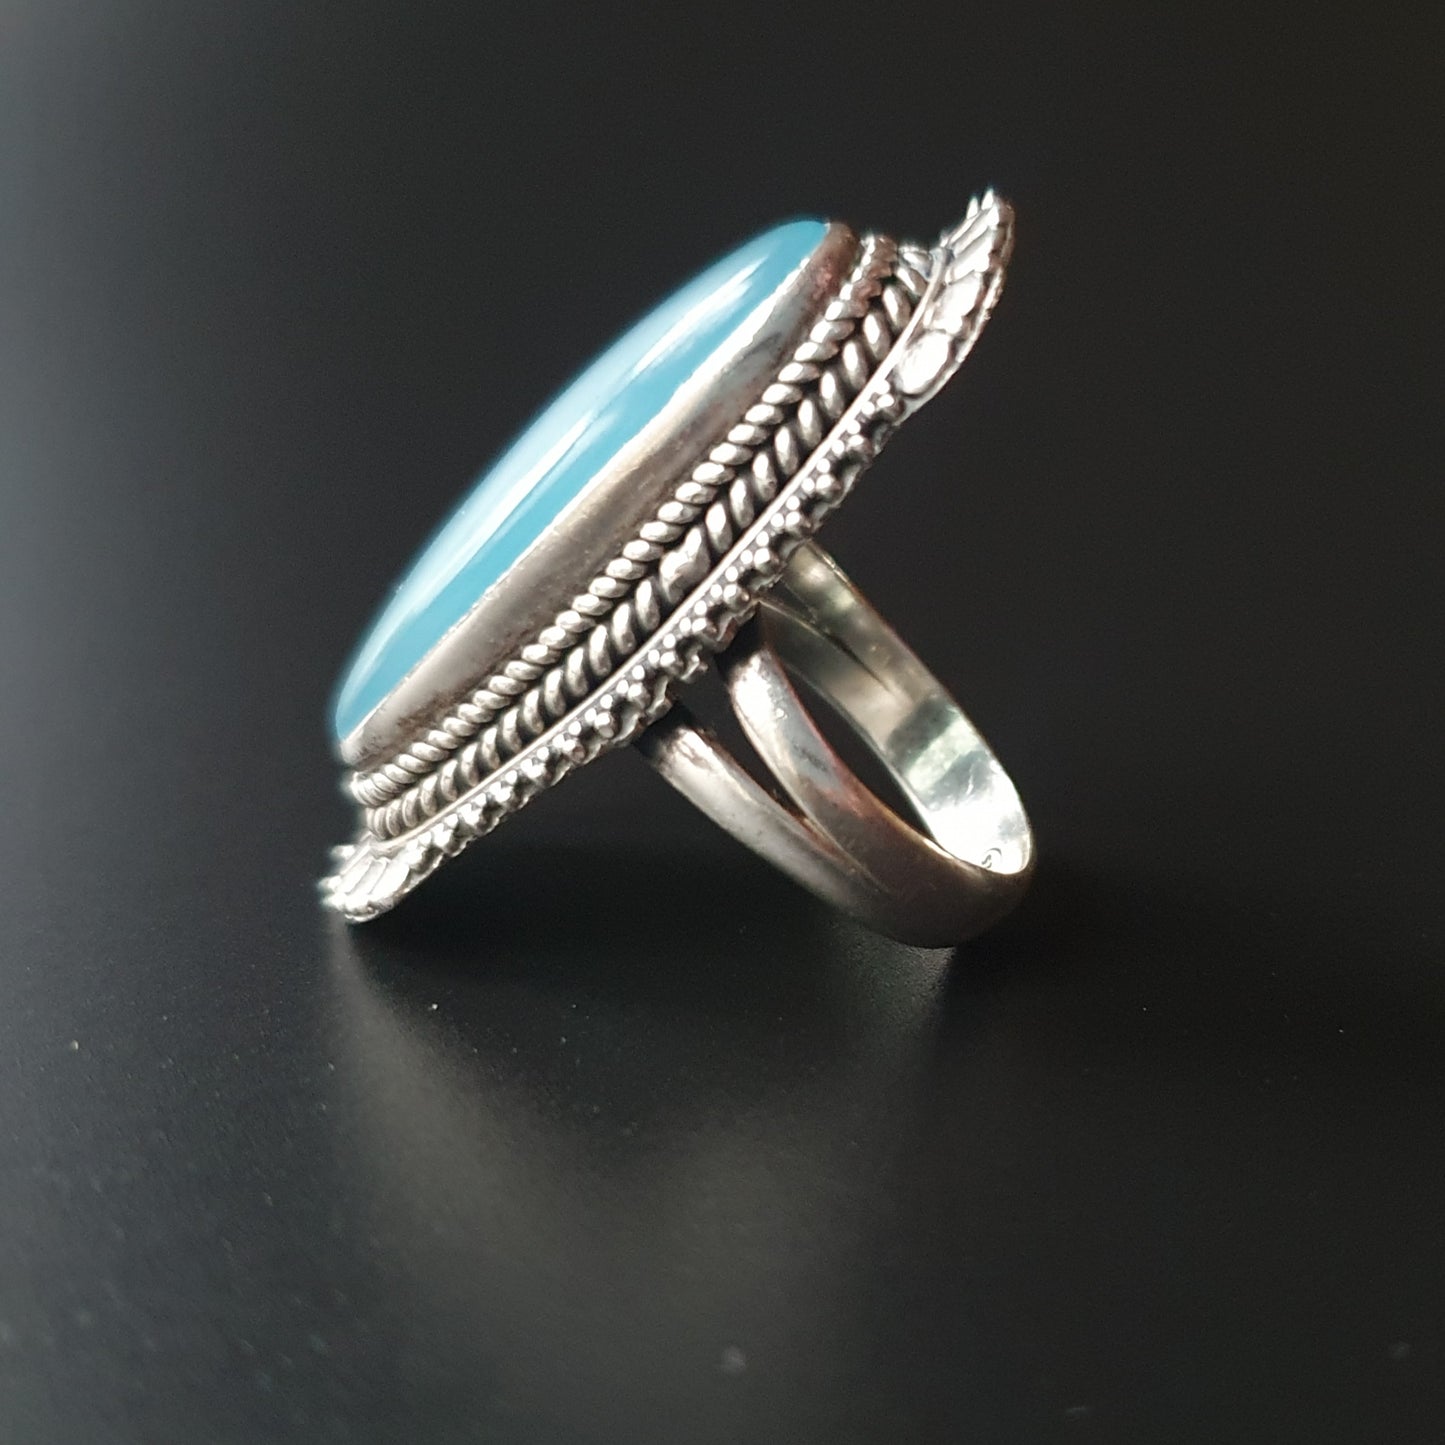 Blue chalcedony,  ring, sterling silver,  gifts